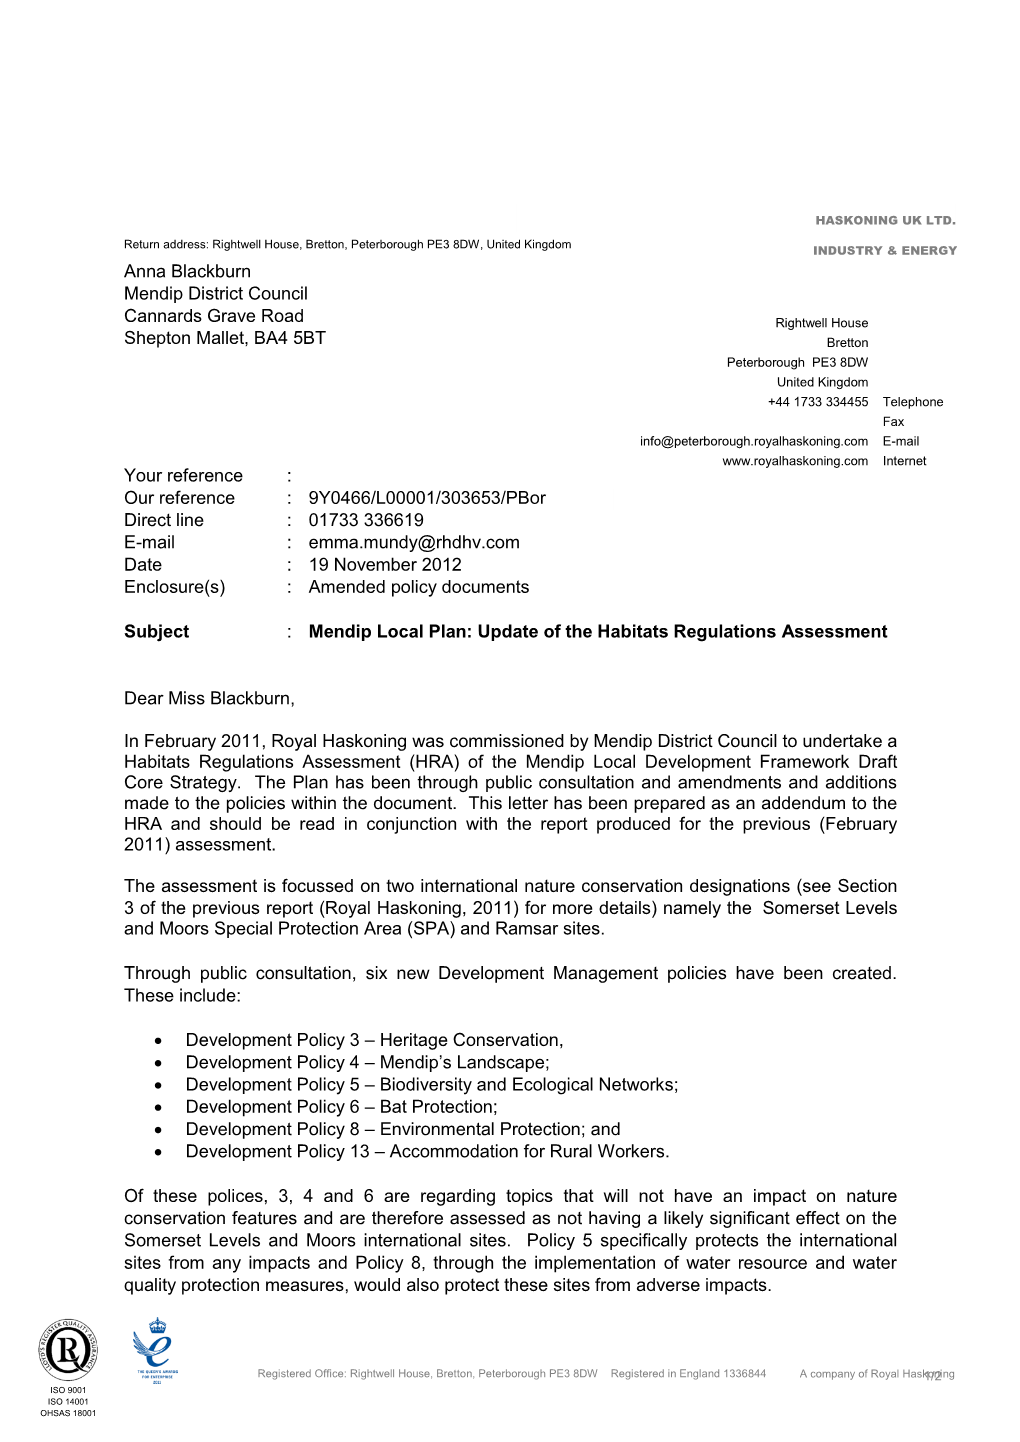 Letter Has Been Prepared As an Addendum to the HRA and Should Be Read in Conjunction with the Report Produced for the Previous (February 2011) Assessment